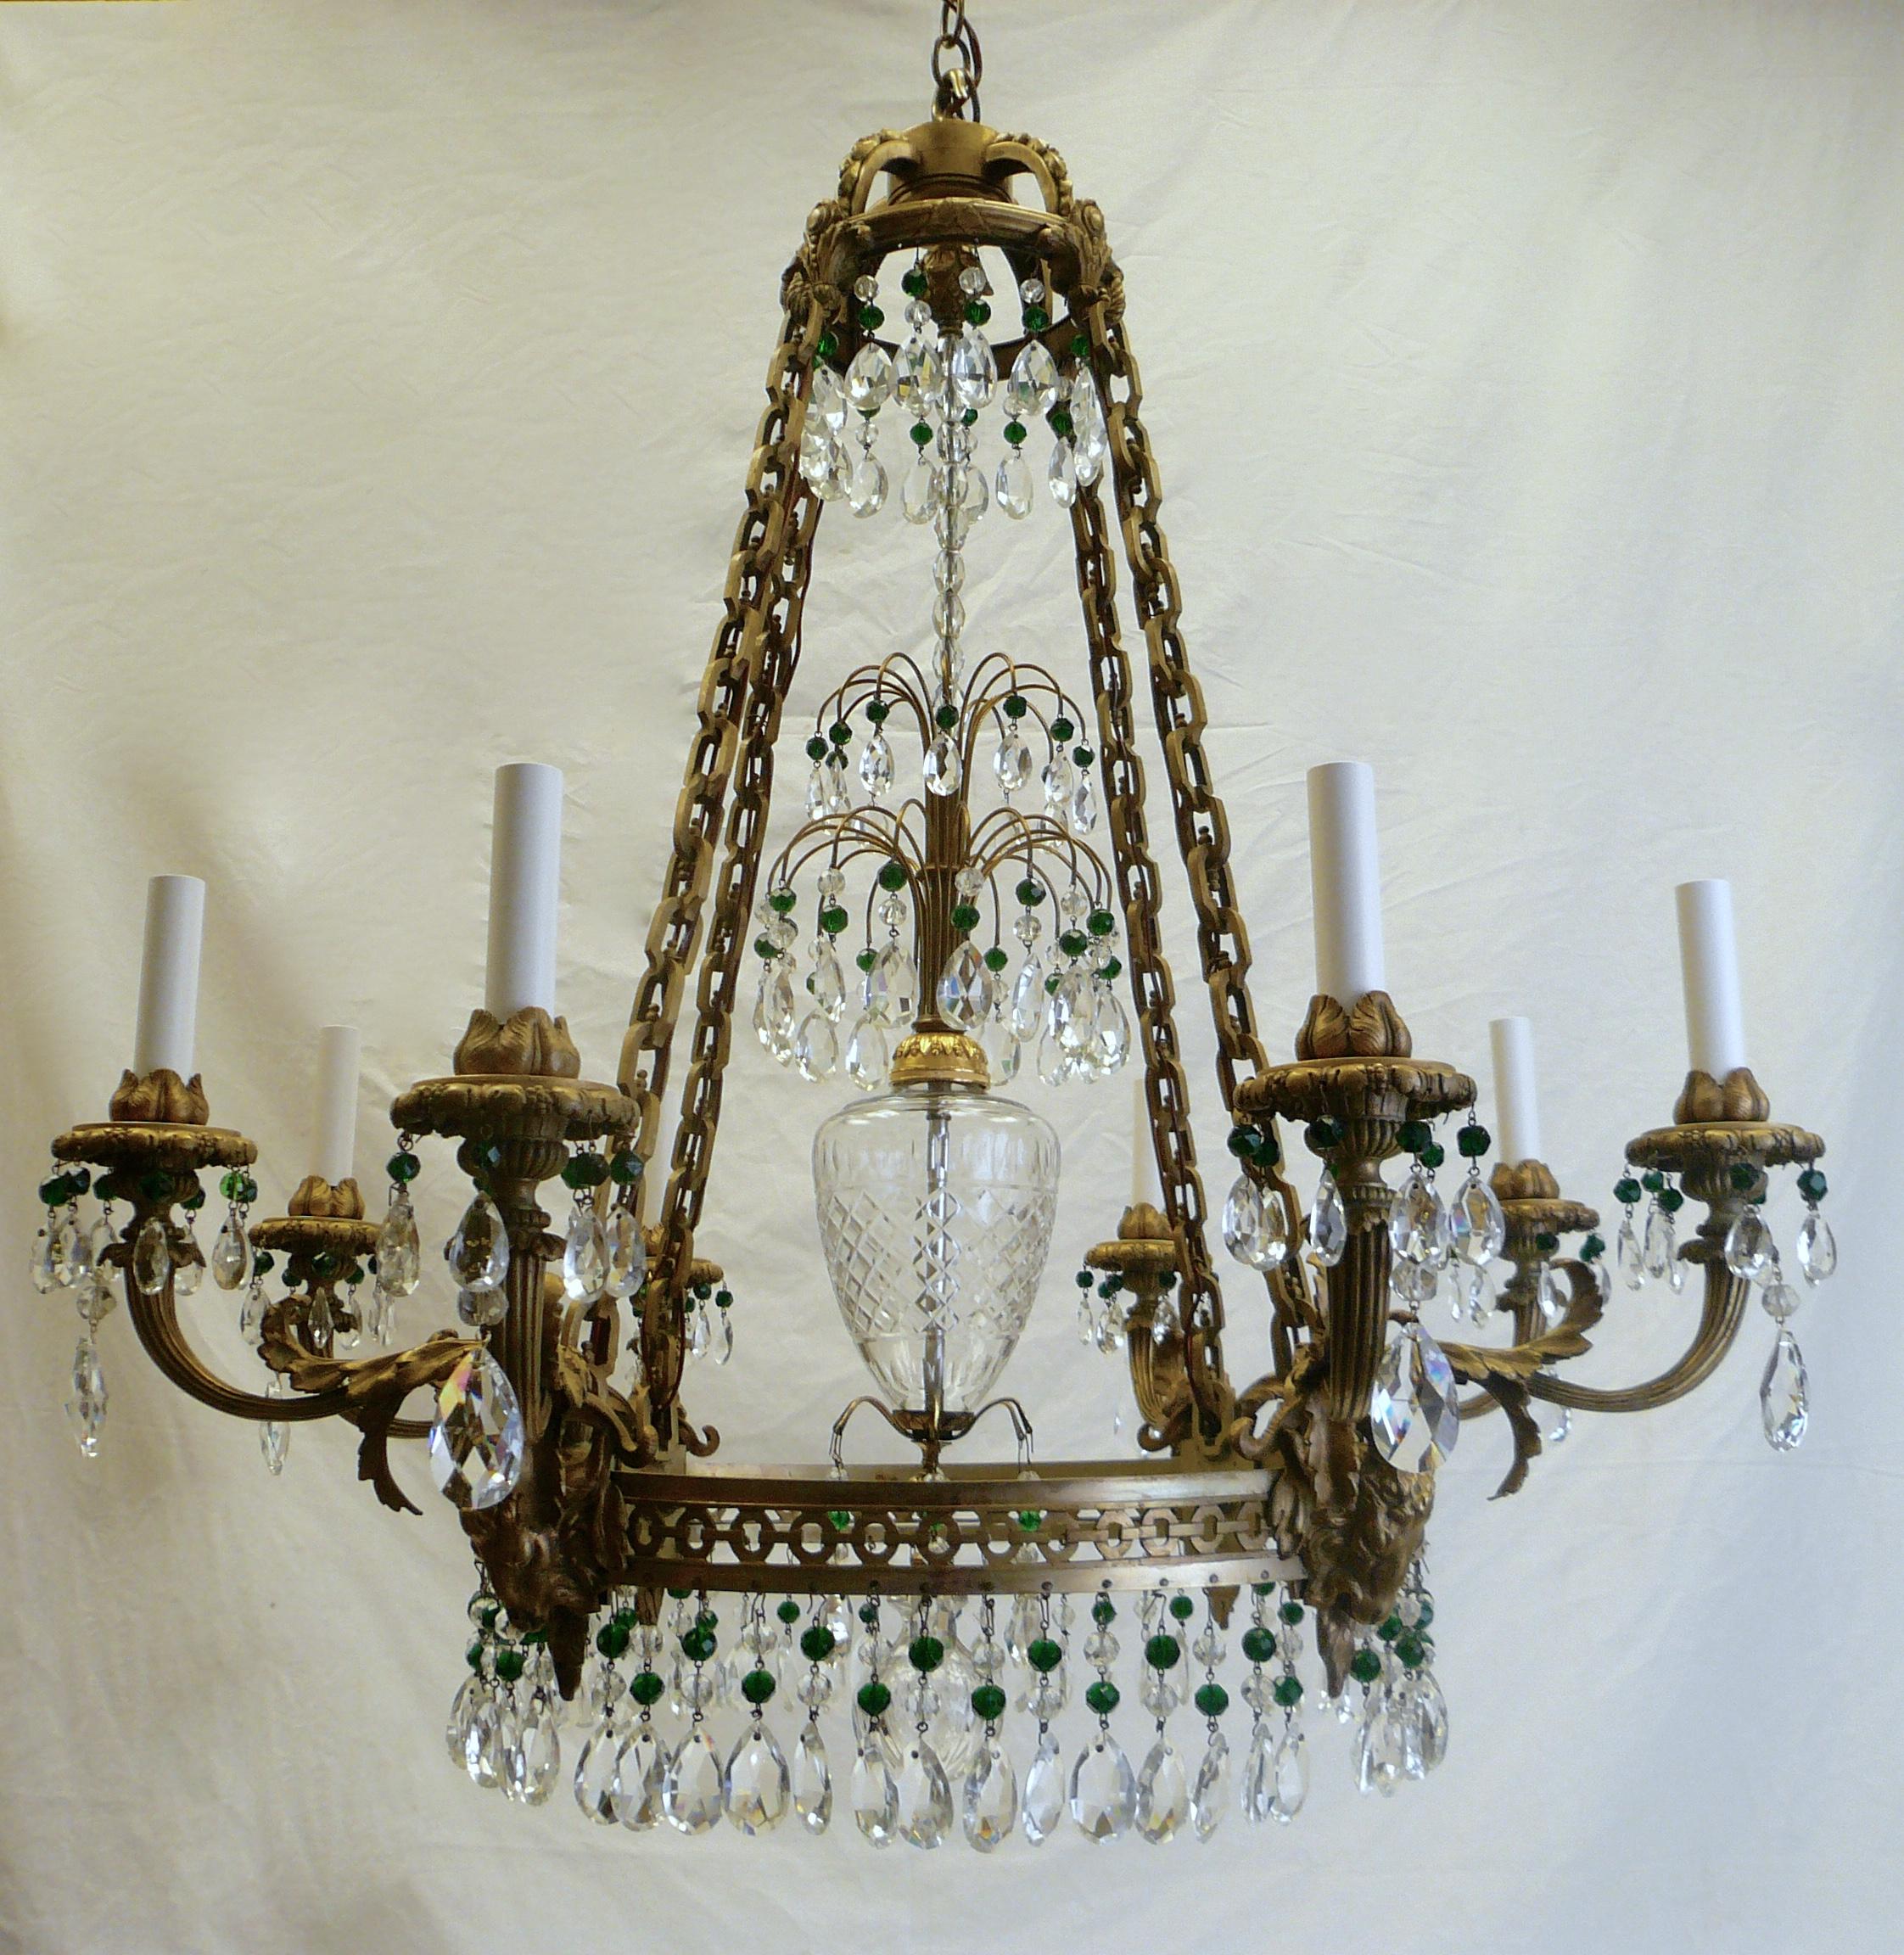 European Russian Neoclassical or Baltic Style Bronze and Crystal Chandelier For Sale